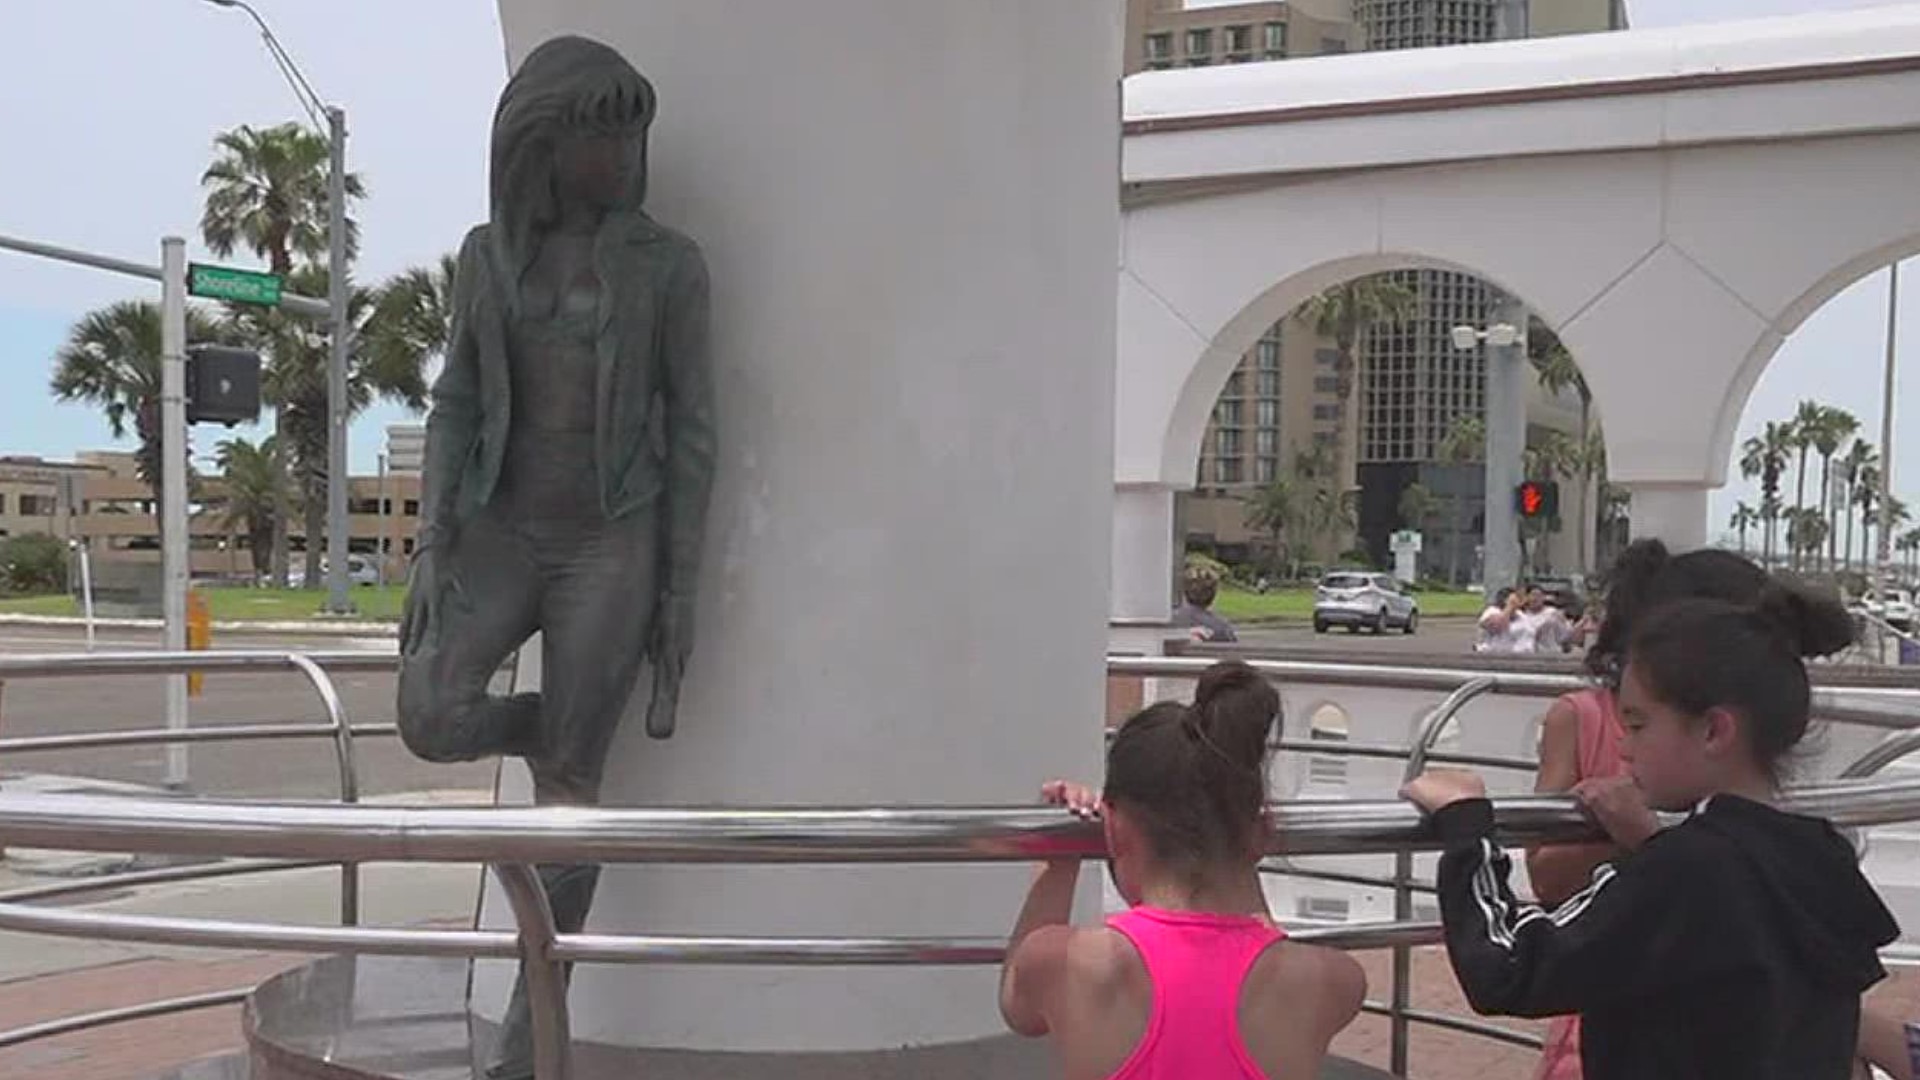 The City is hoping of bringing the original artist back to retouch the statue.